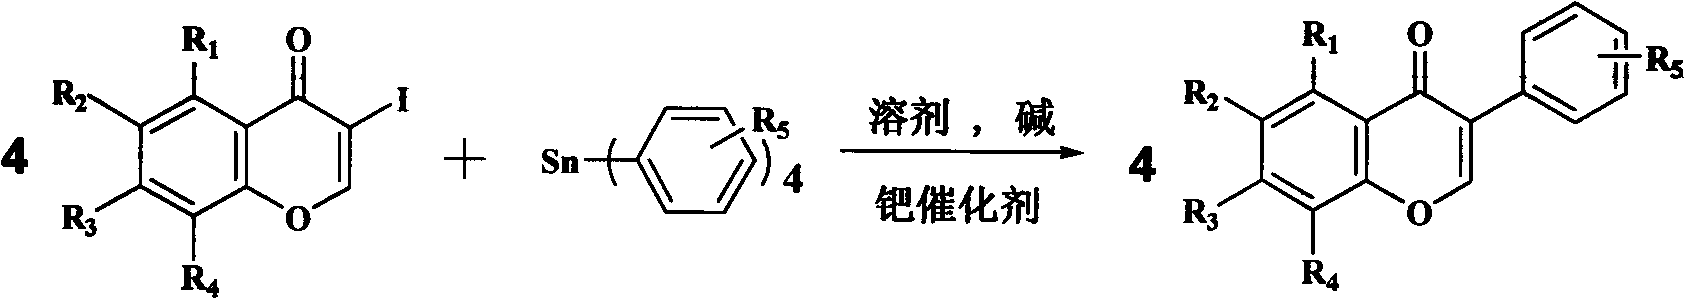 Synthesis of isoflavone compound through Stille crossed coupling reaction